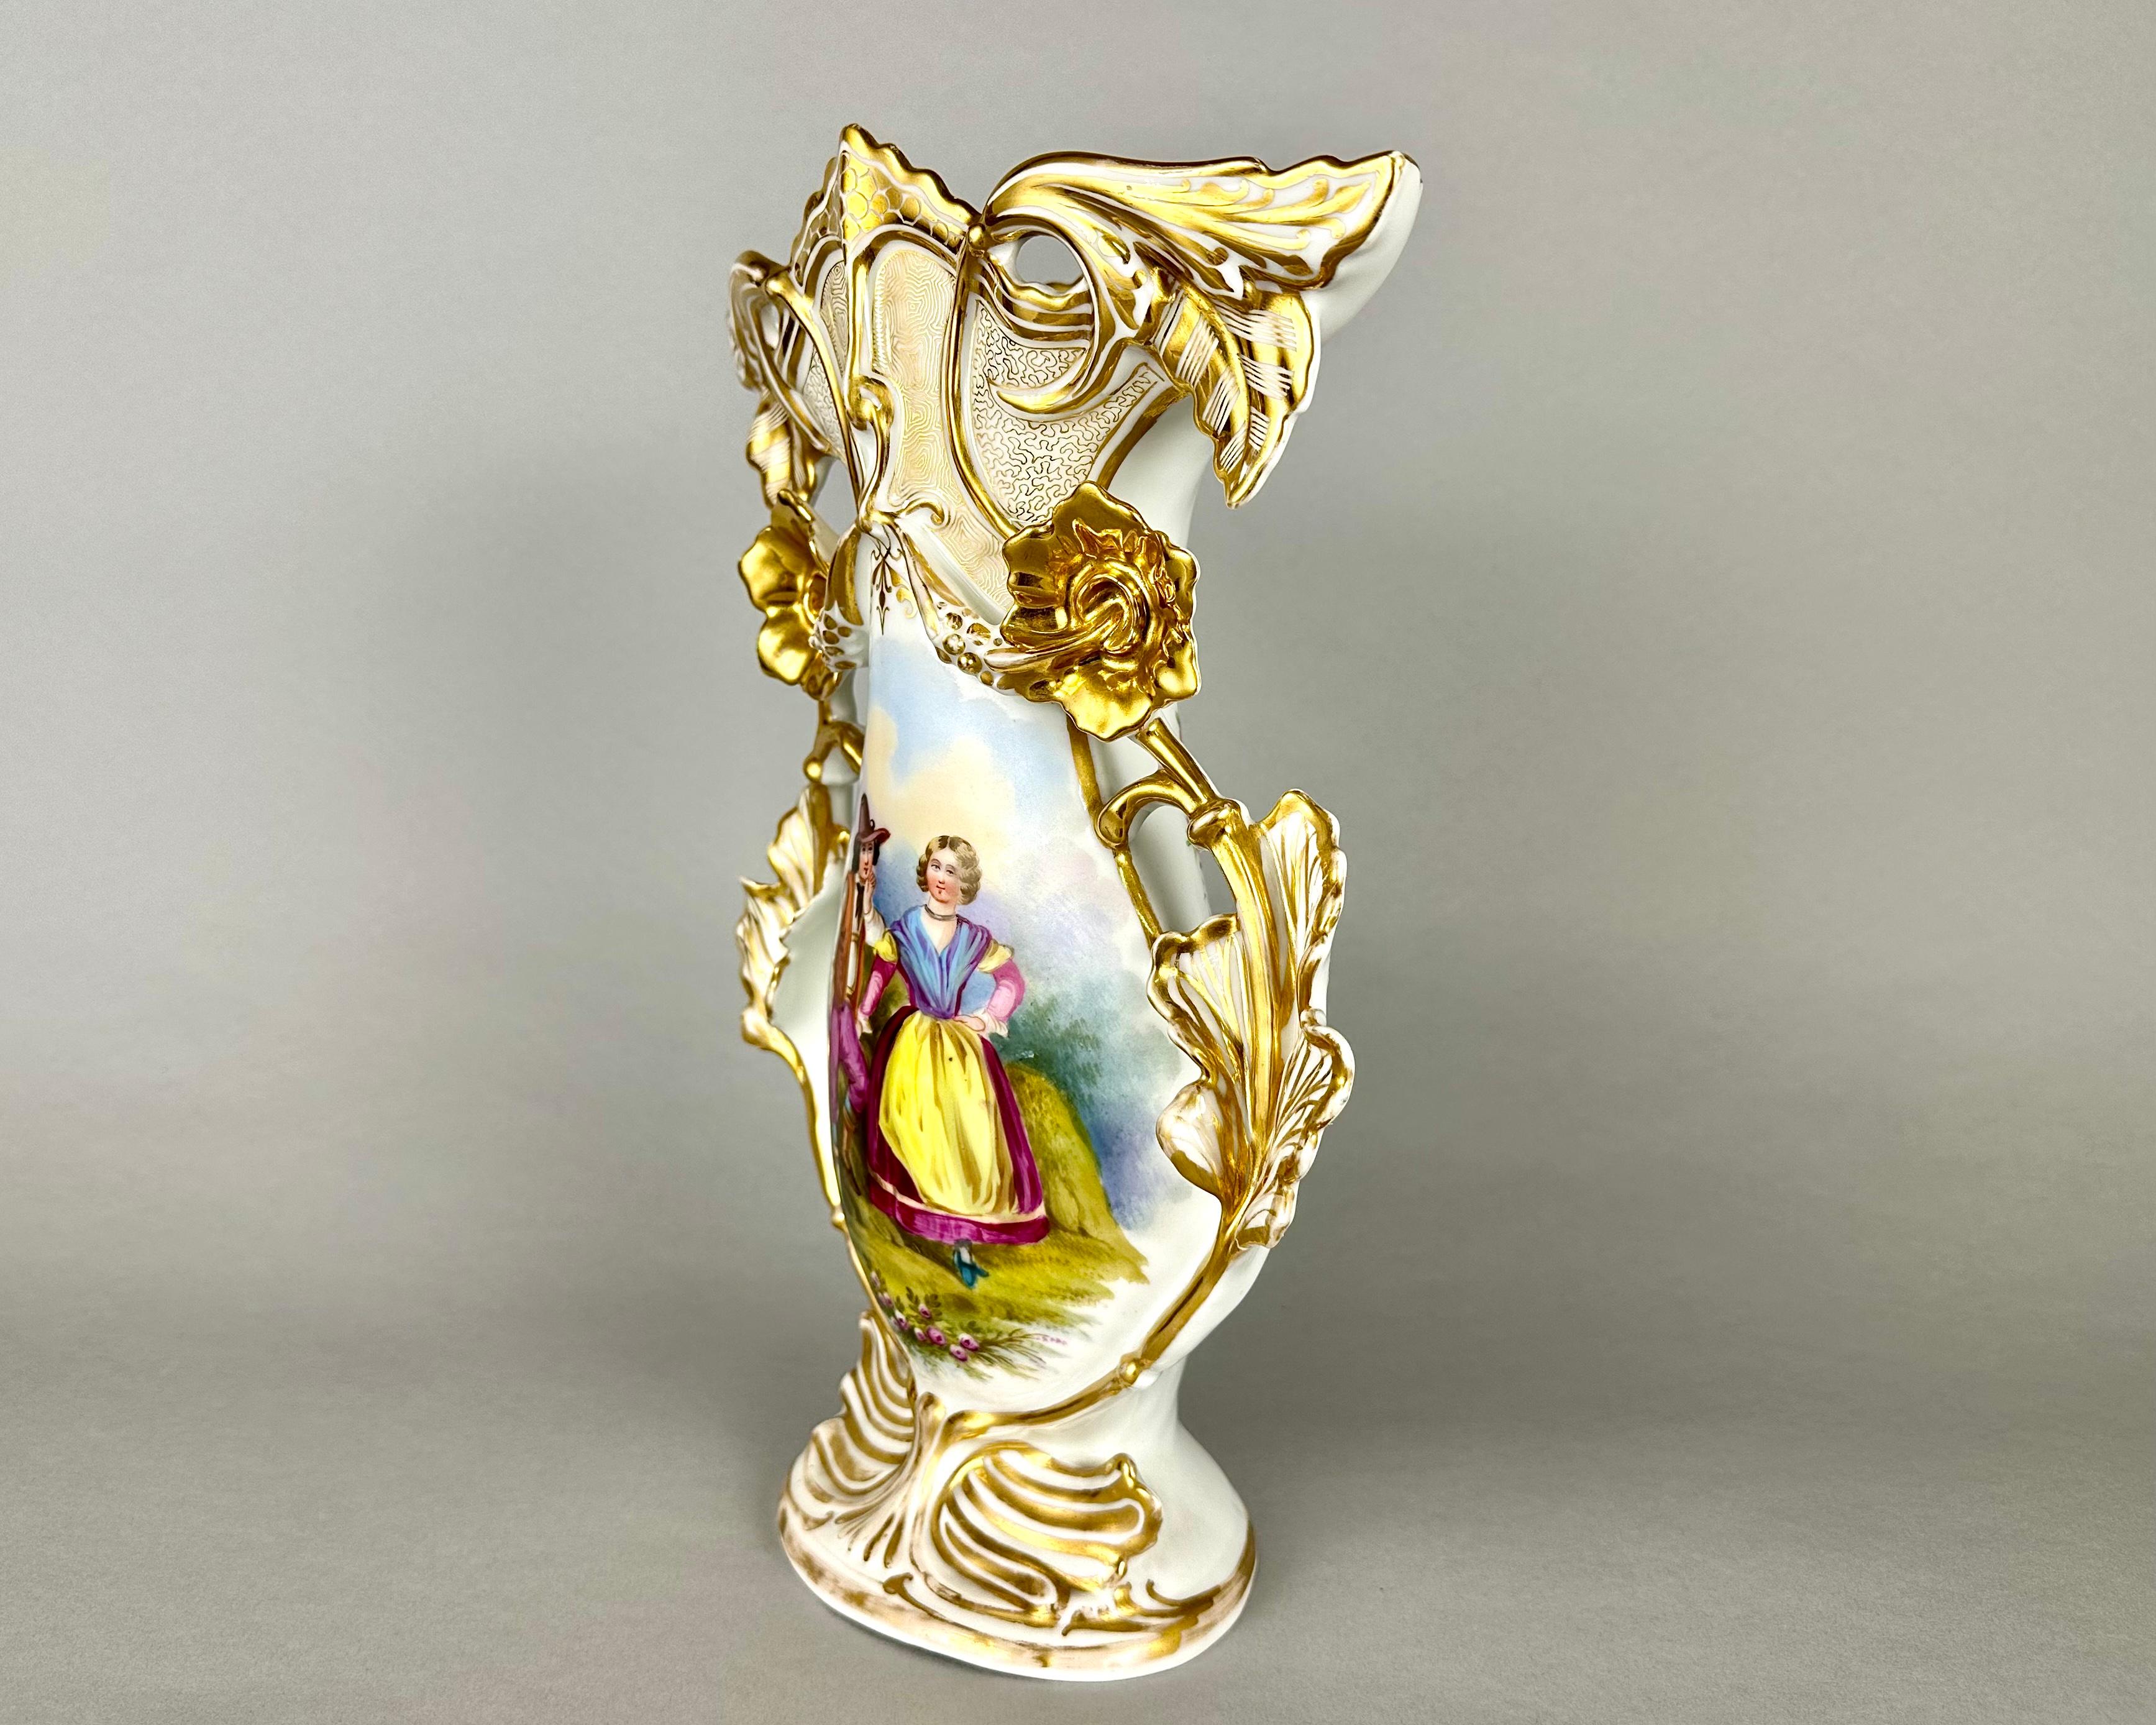 Stunning antique porcelain vase with flower handles and elaborately shaped tops crafted in France during the end of 19 Century and Early 20th.

Featuring ornate Rococo design in the style of early Meissen.

With hand painted floral motif to one side